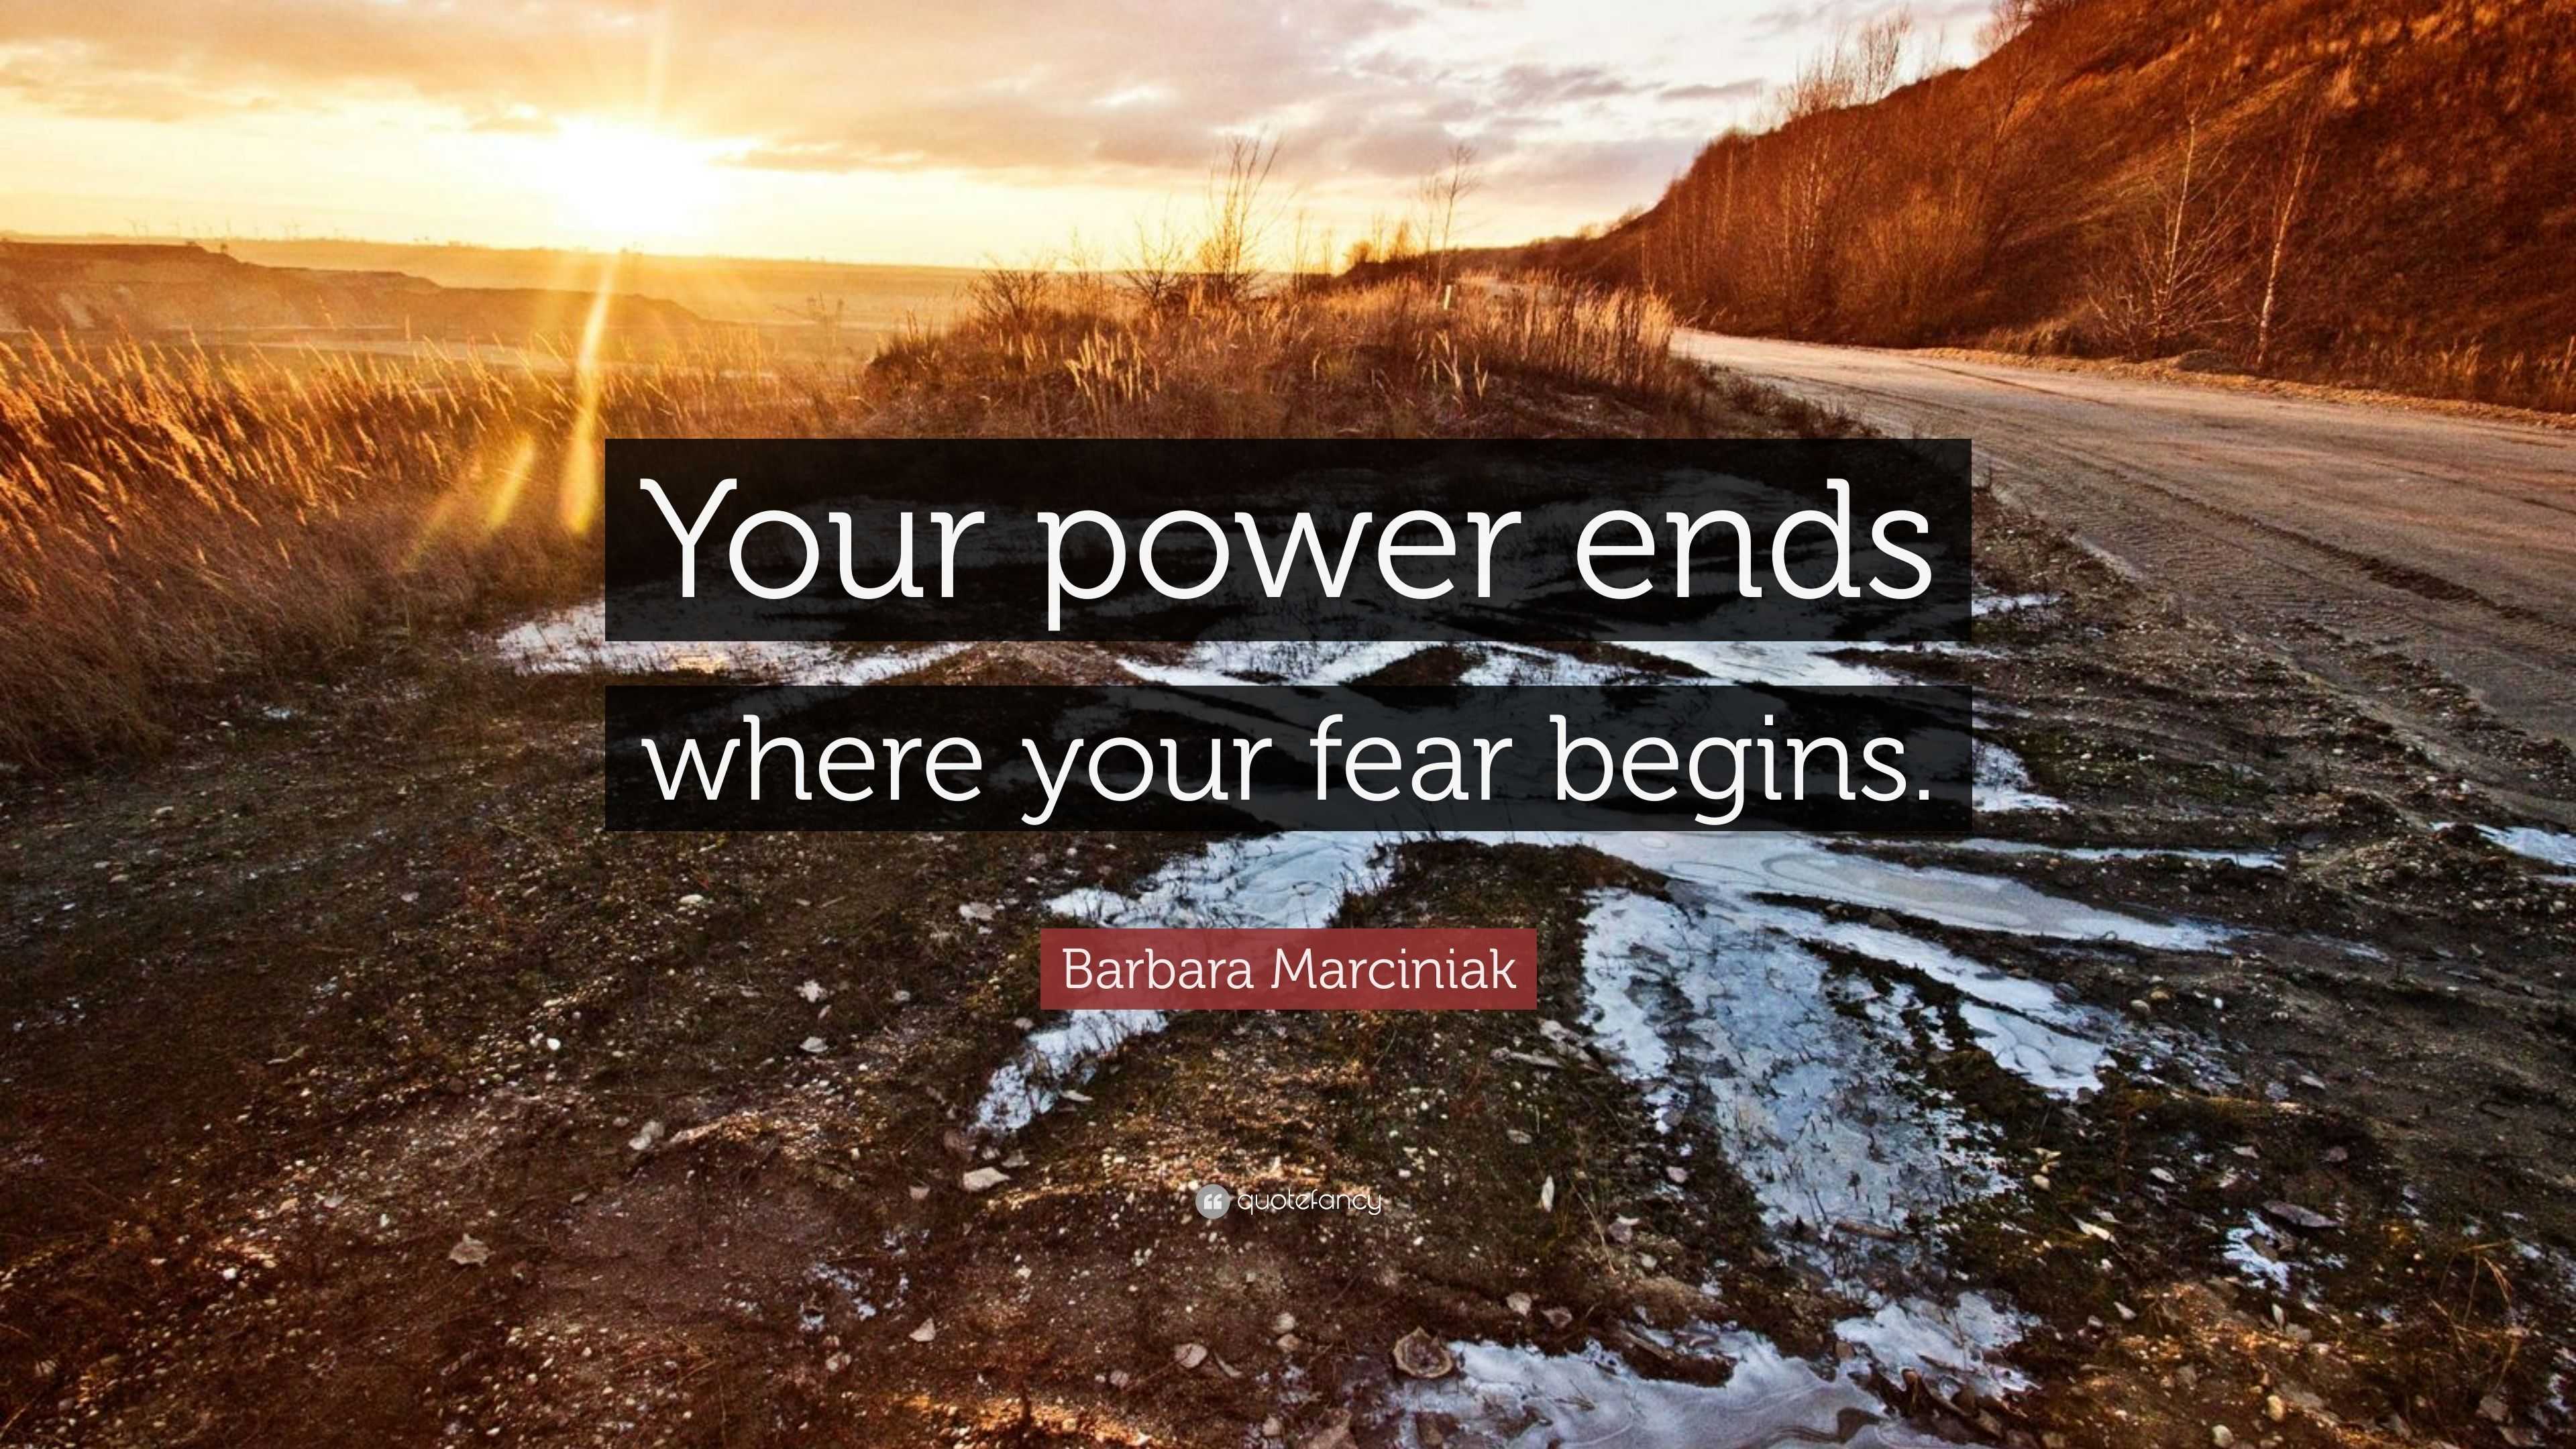 Barbara Marciniak Quote: “Your power ends where your fear begins.”